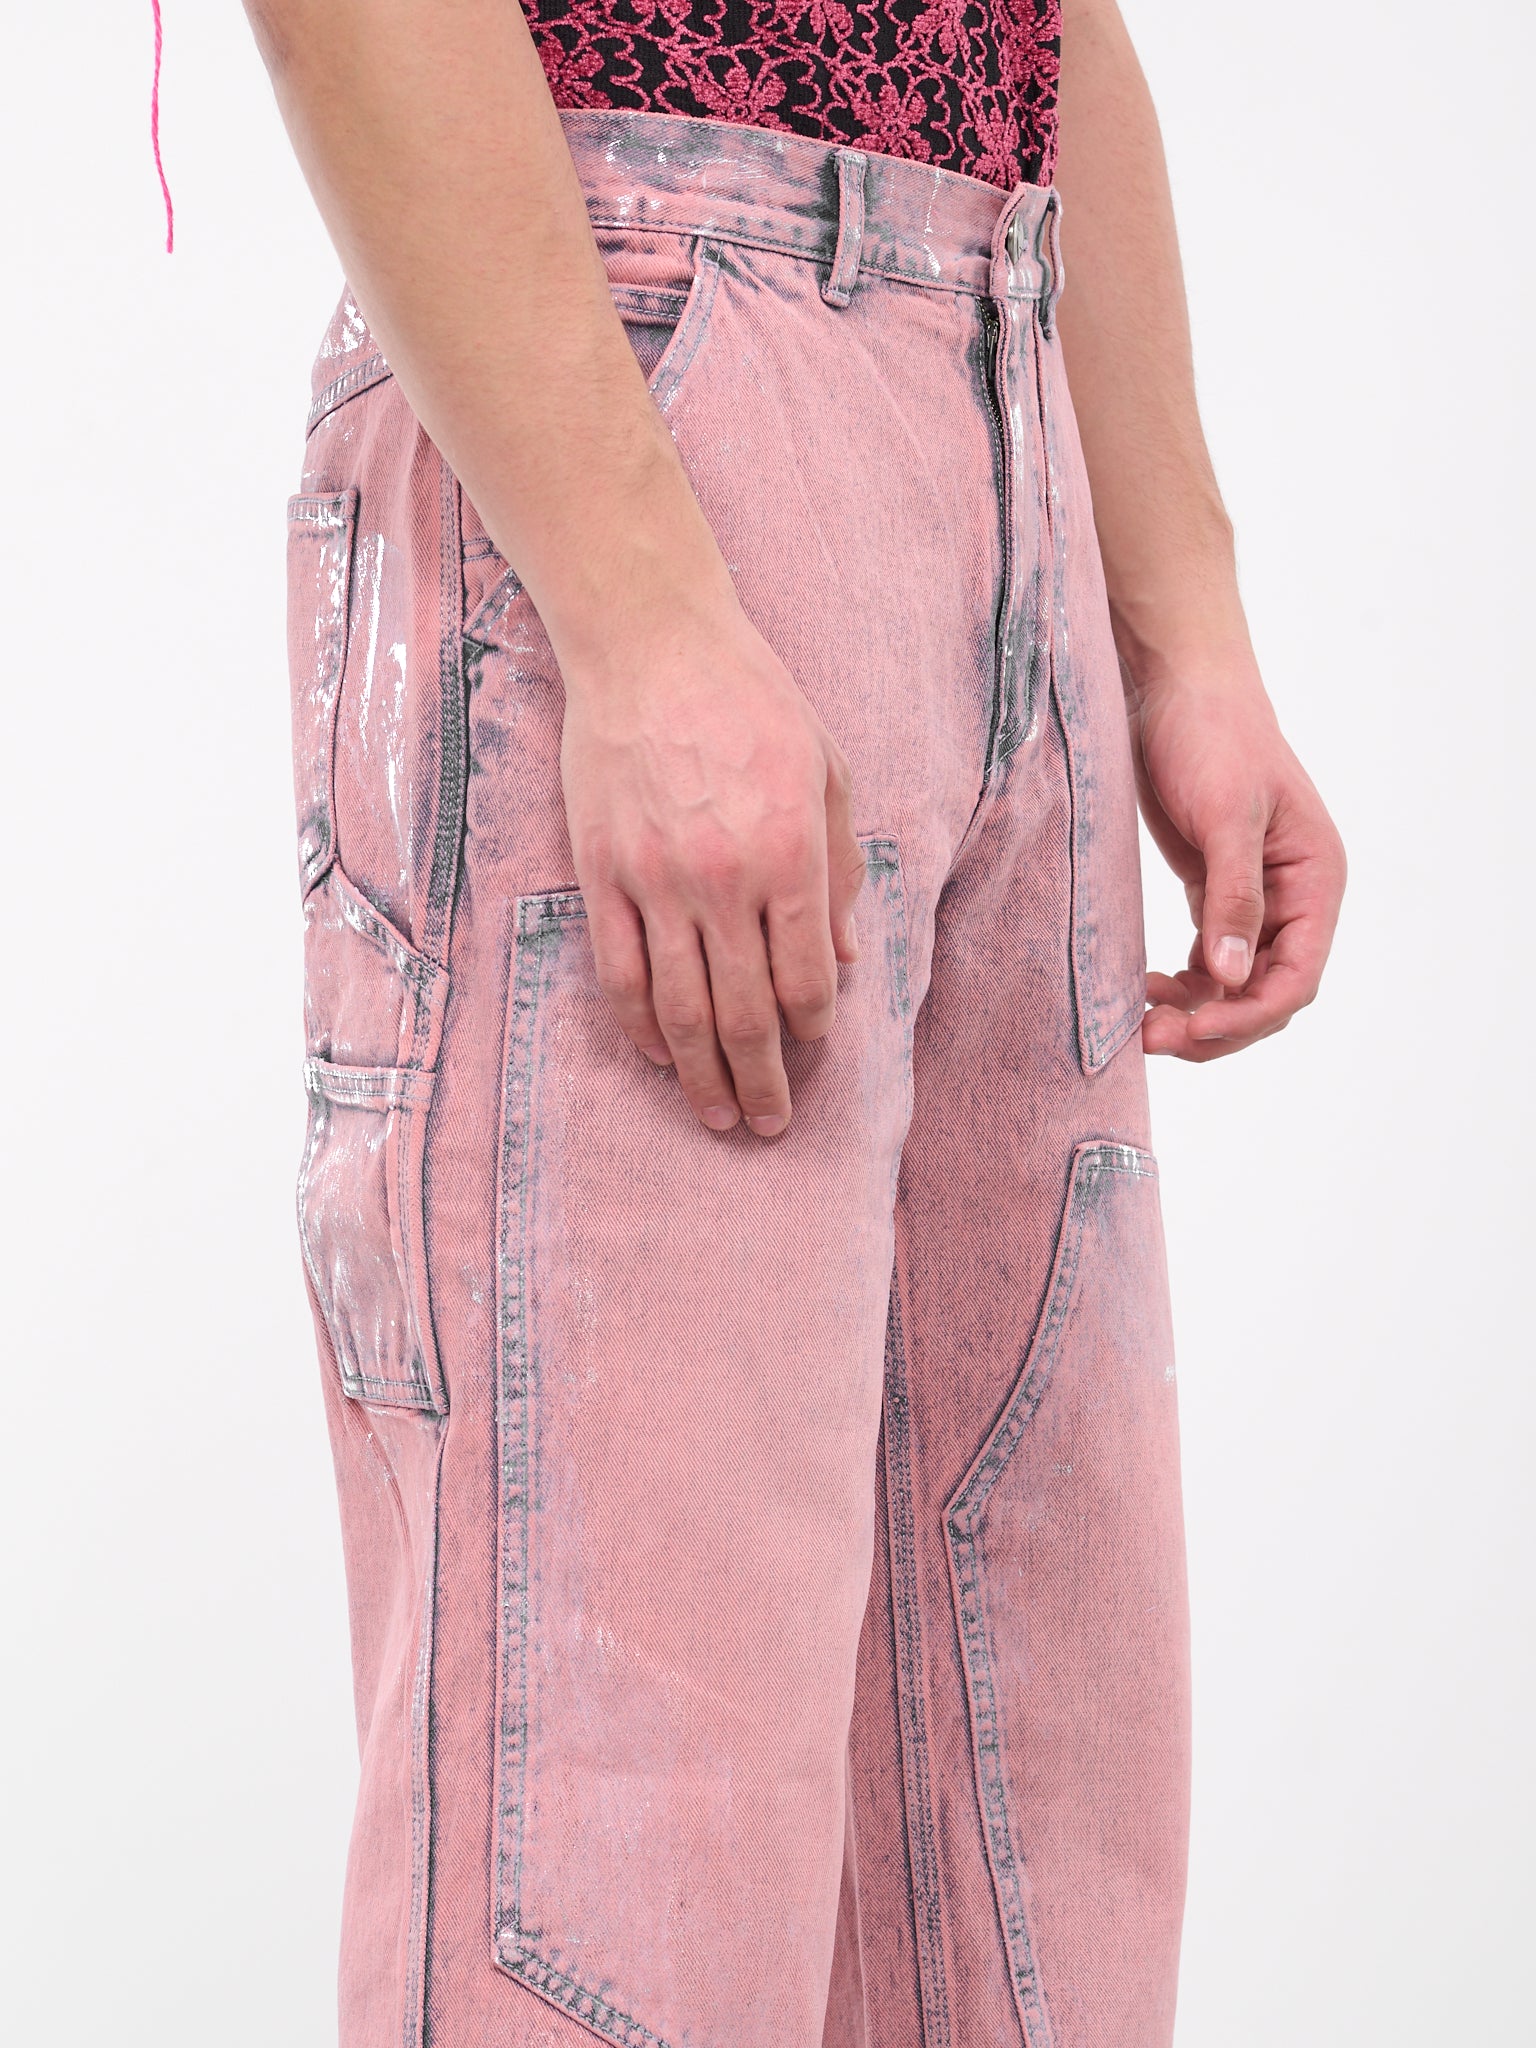 Coated Jeans (APA685M-DUST-PINK)